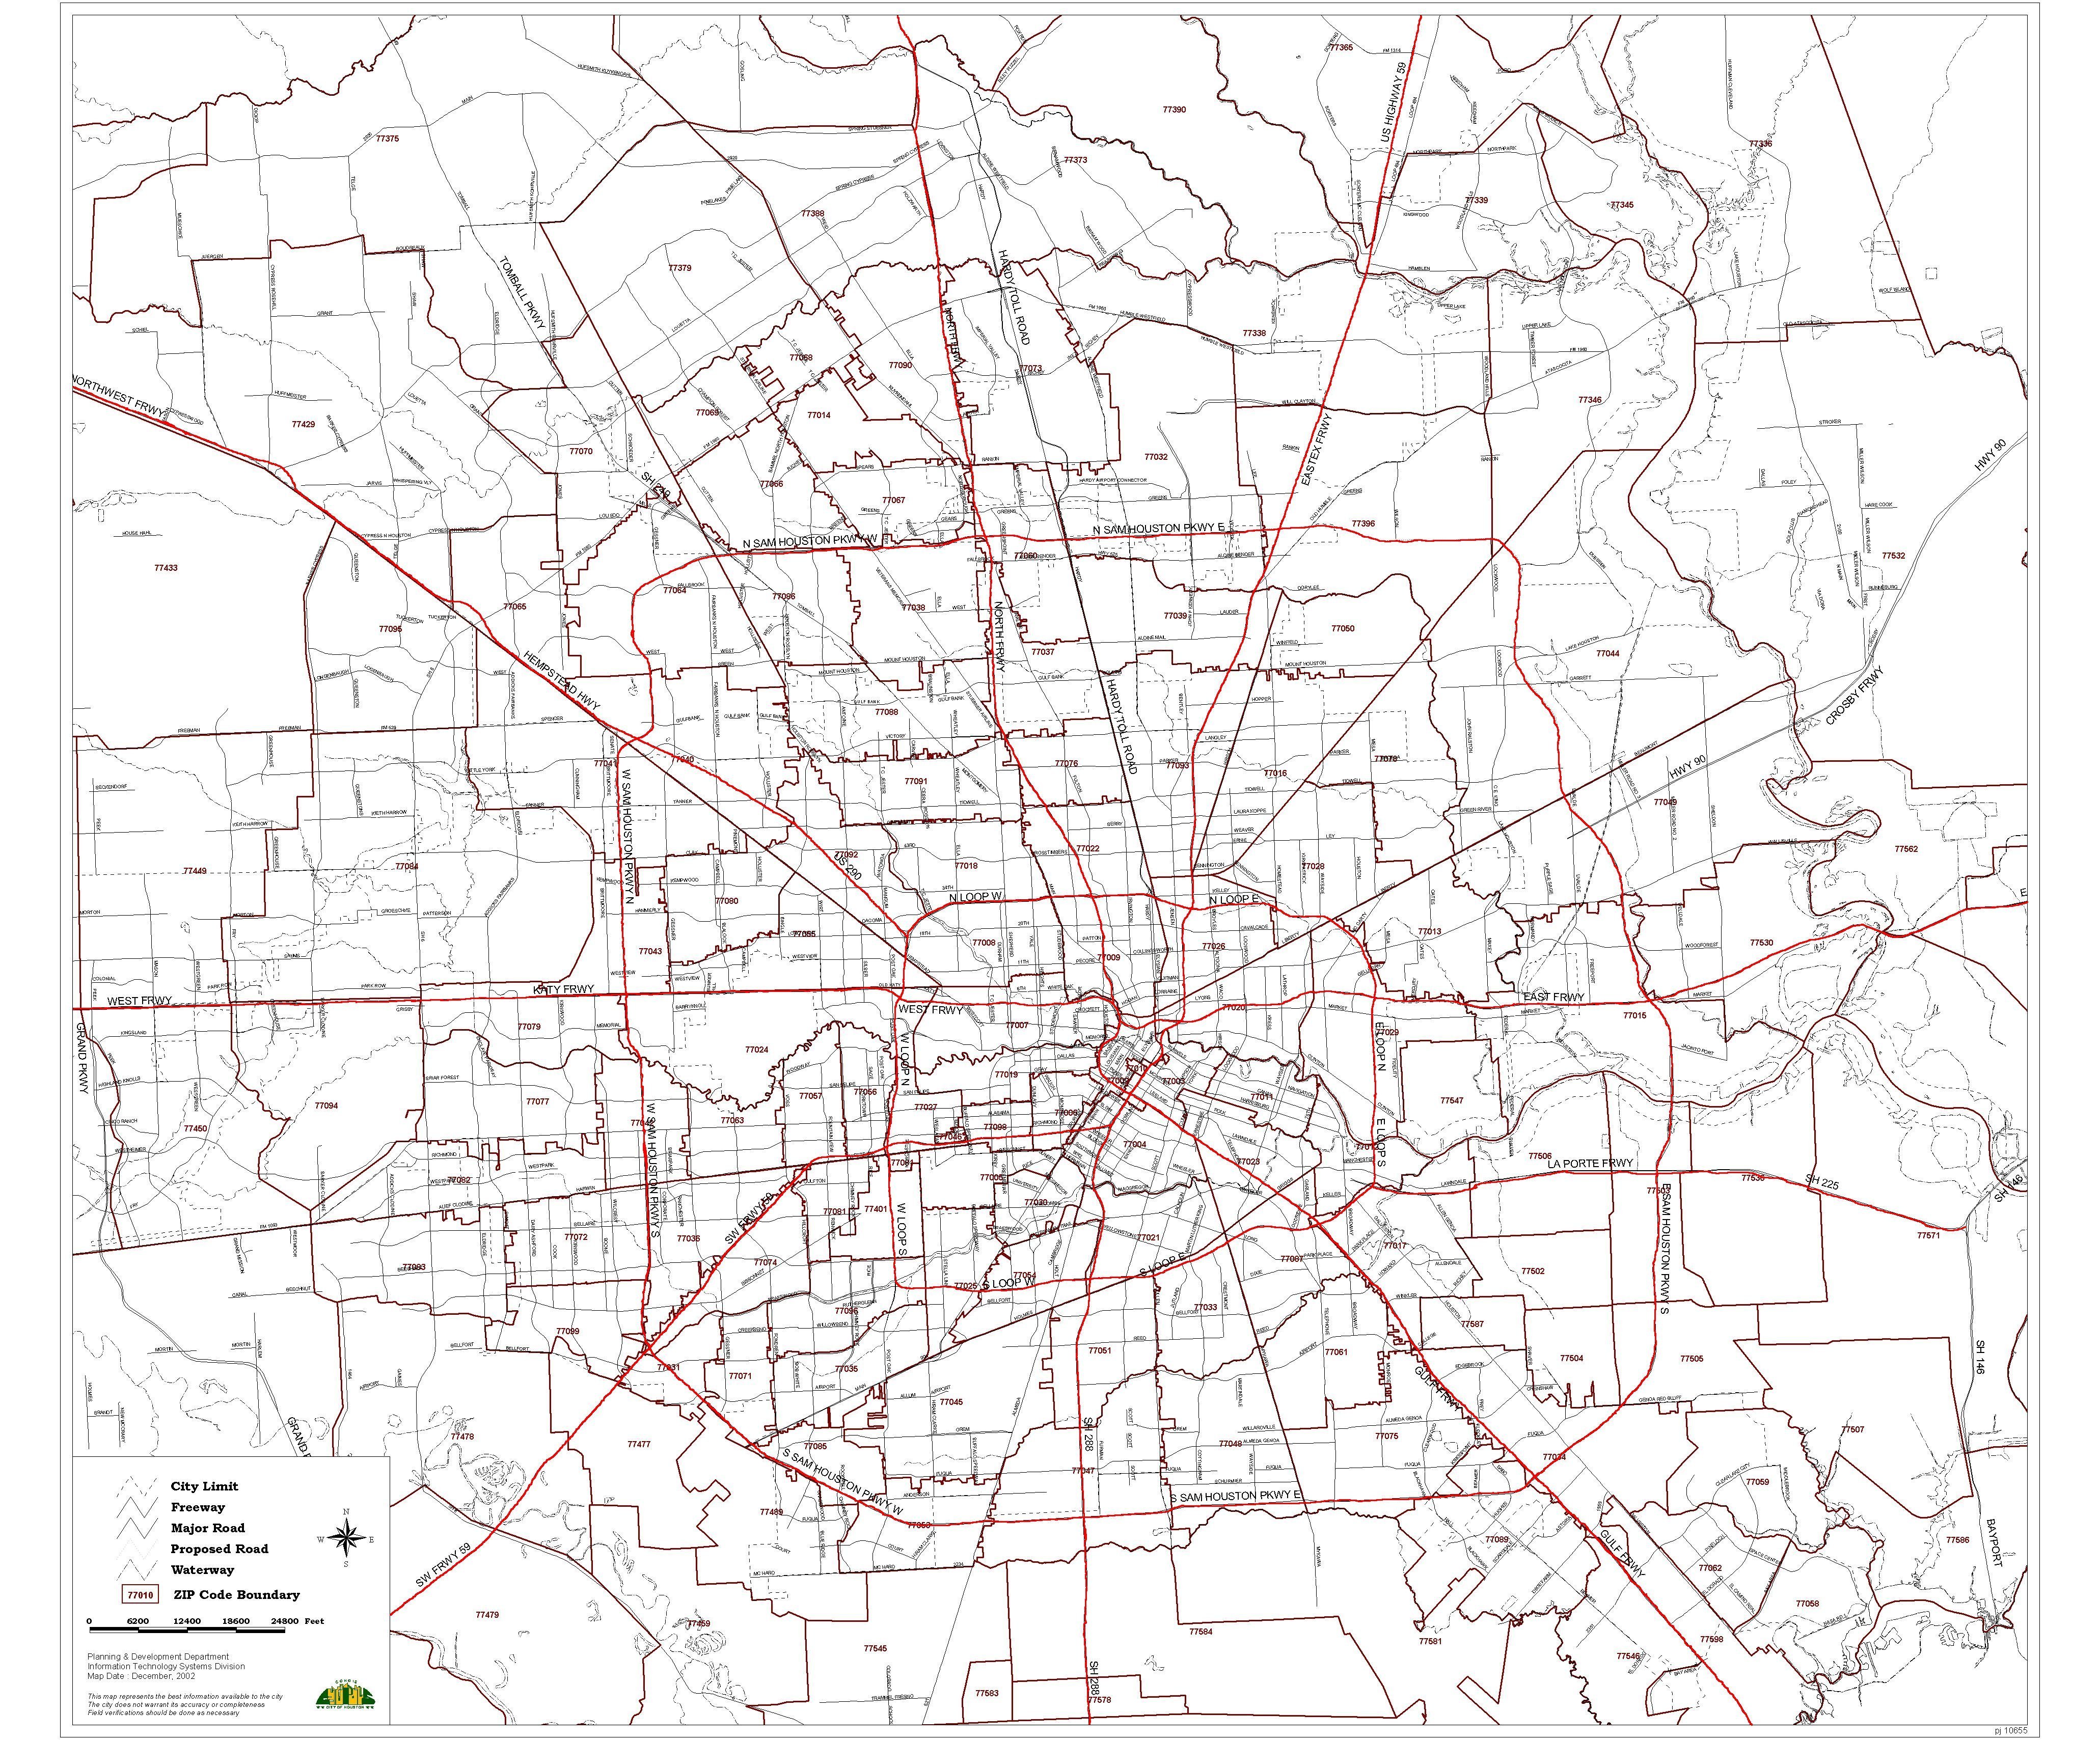 Houston Zip Codes: List and Map